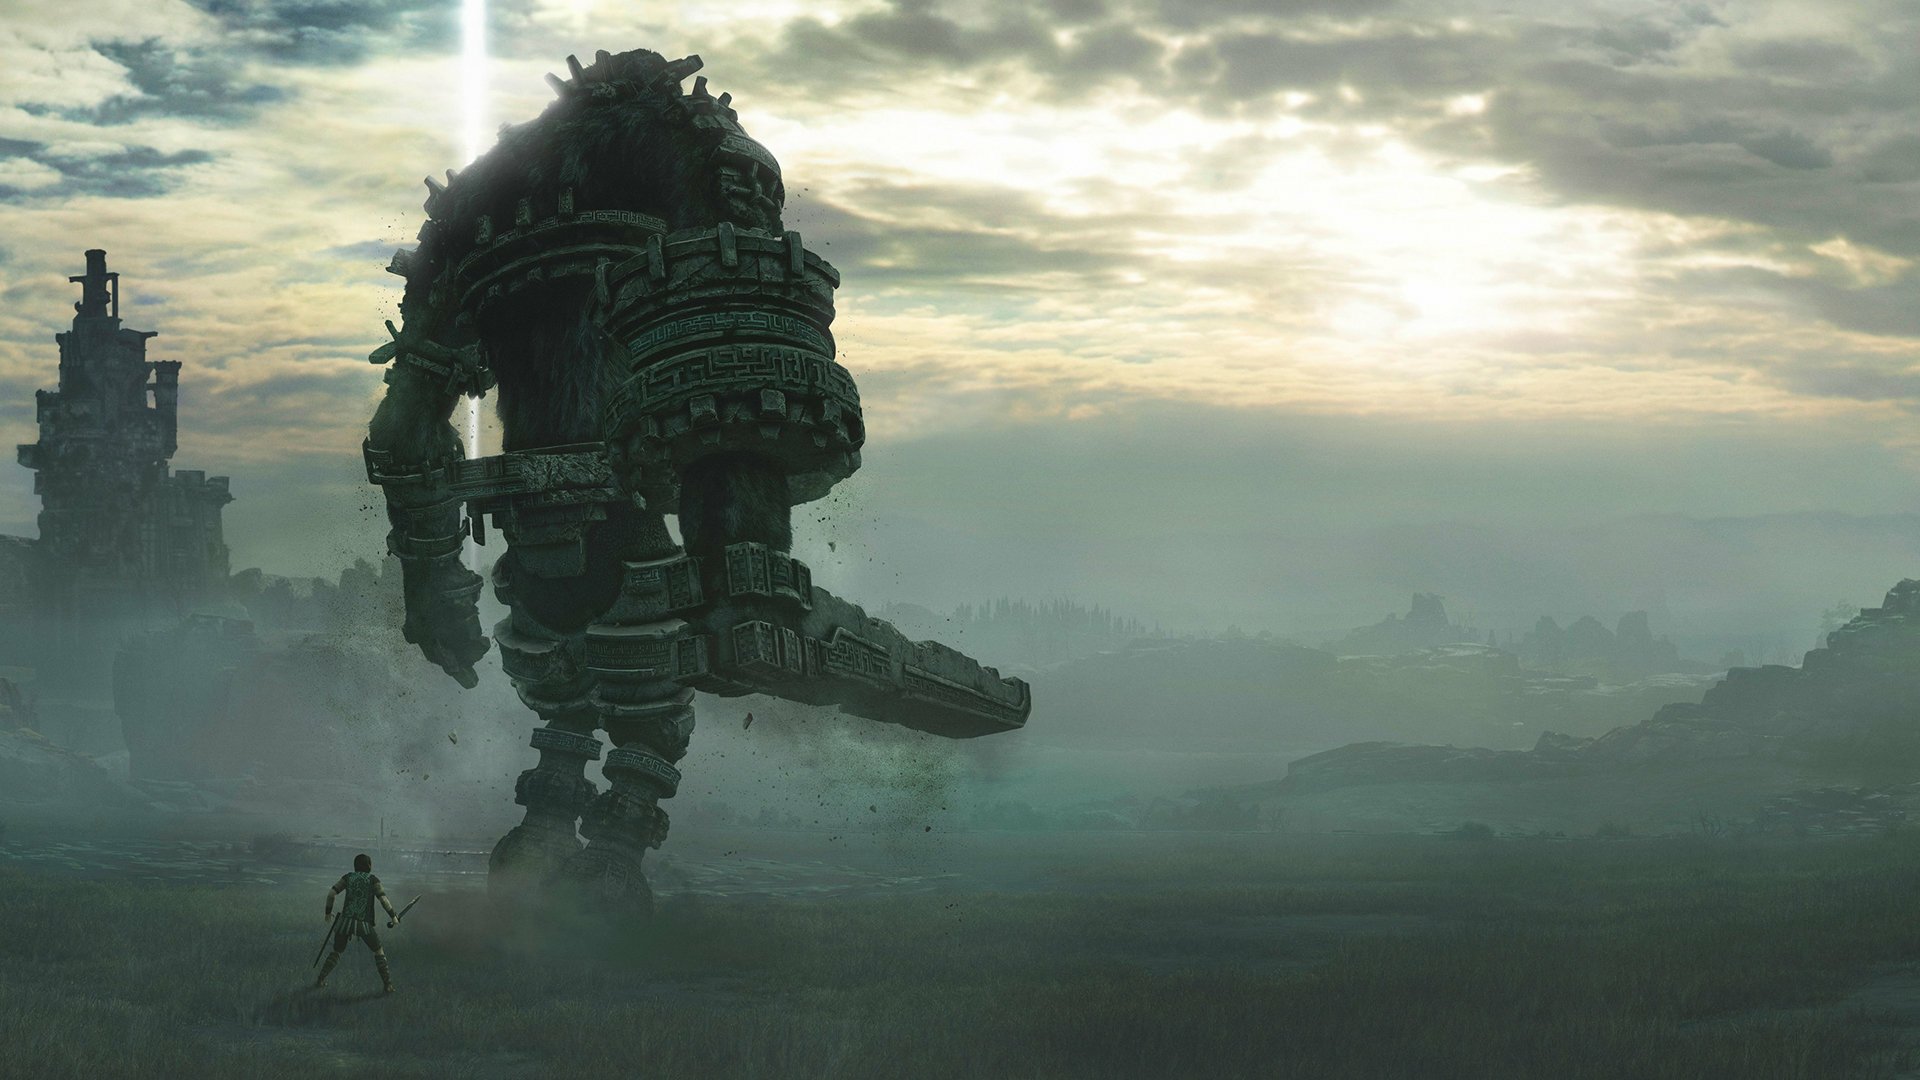 Shadow Of The Colossus Wallpapers - Wallpaper Cave